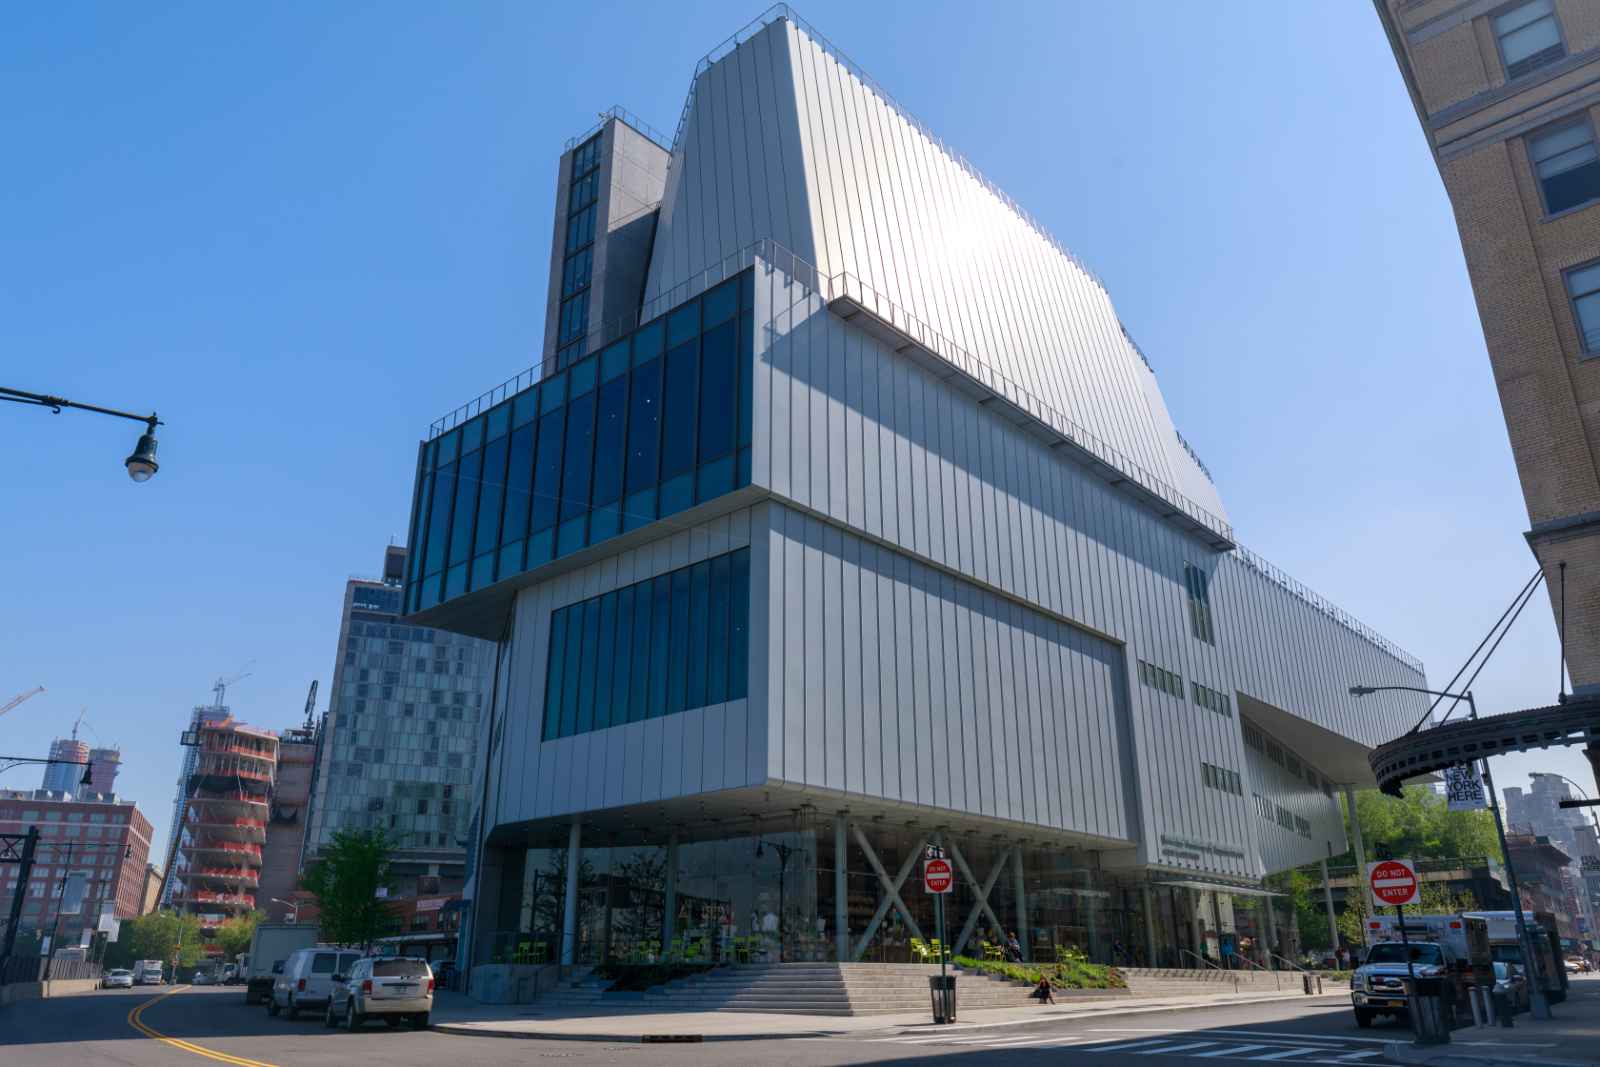 Best Museums in NYC Whitney Museum of American Art